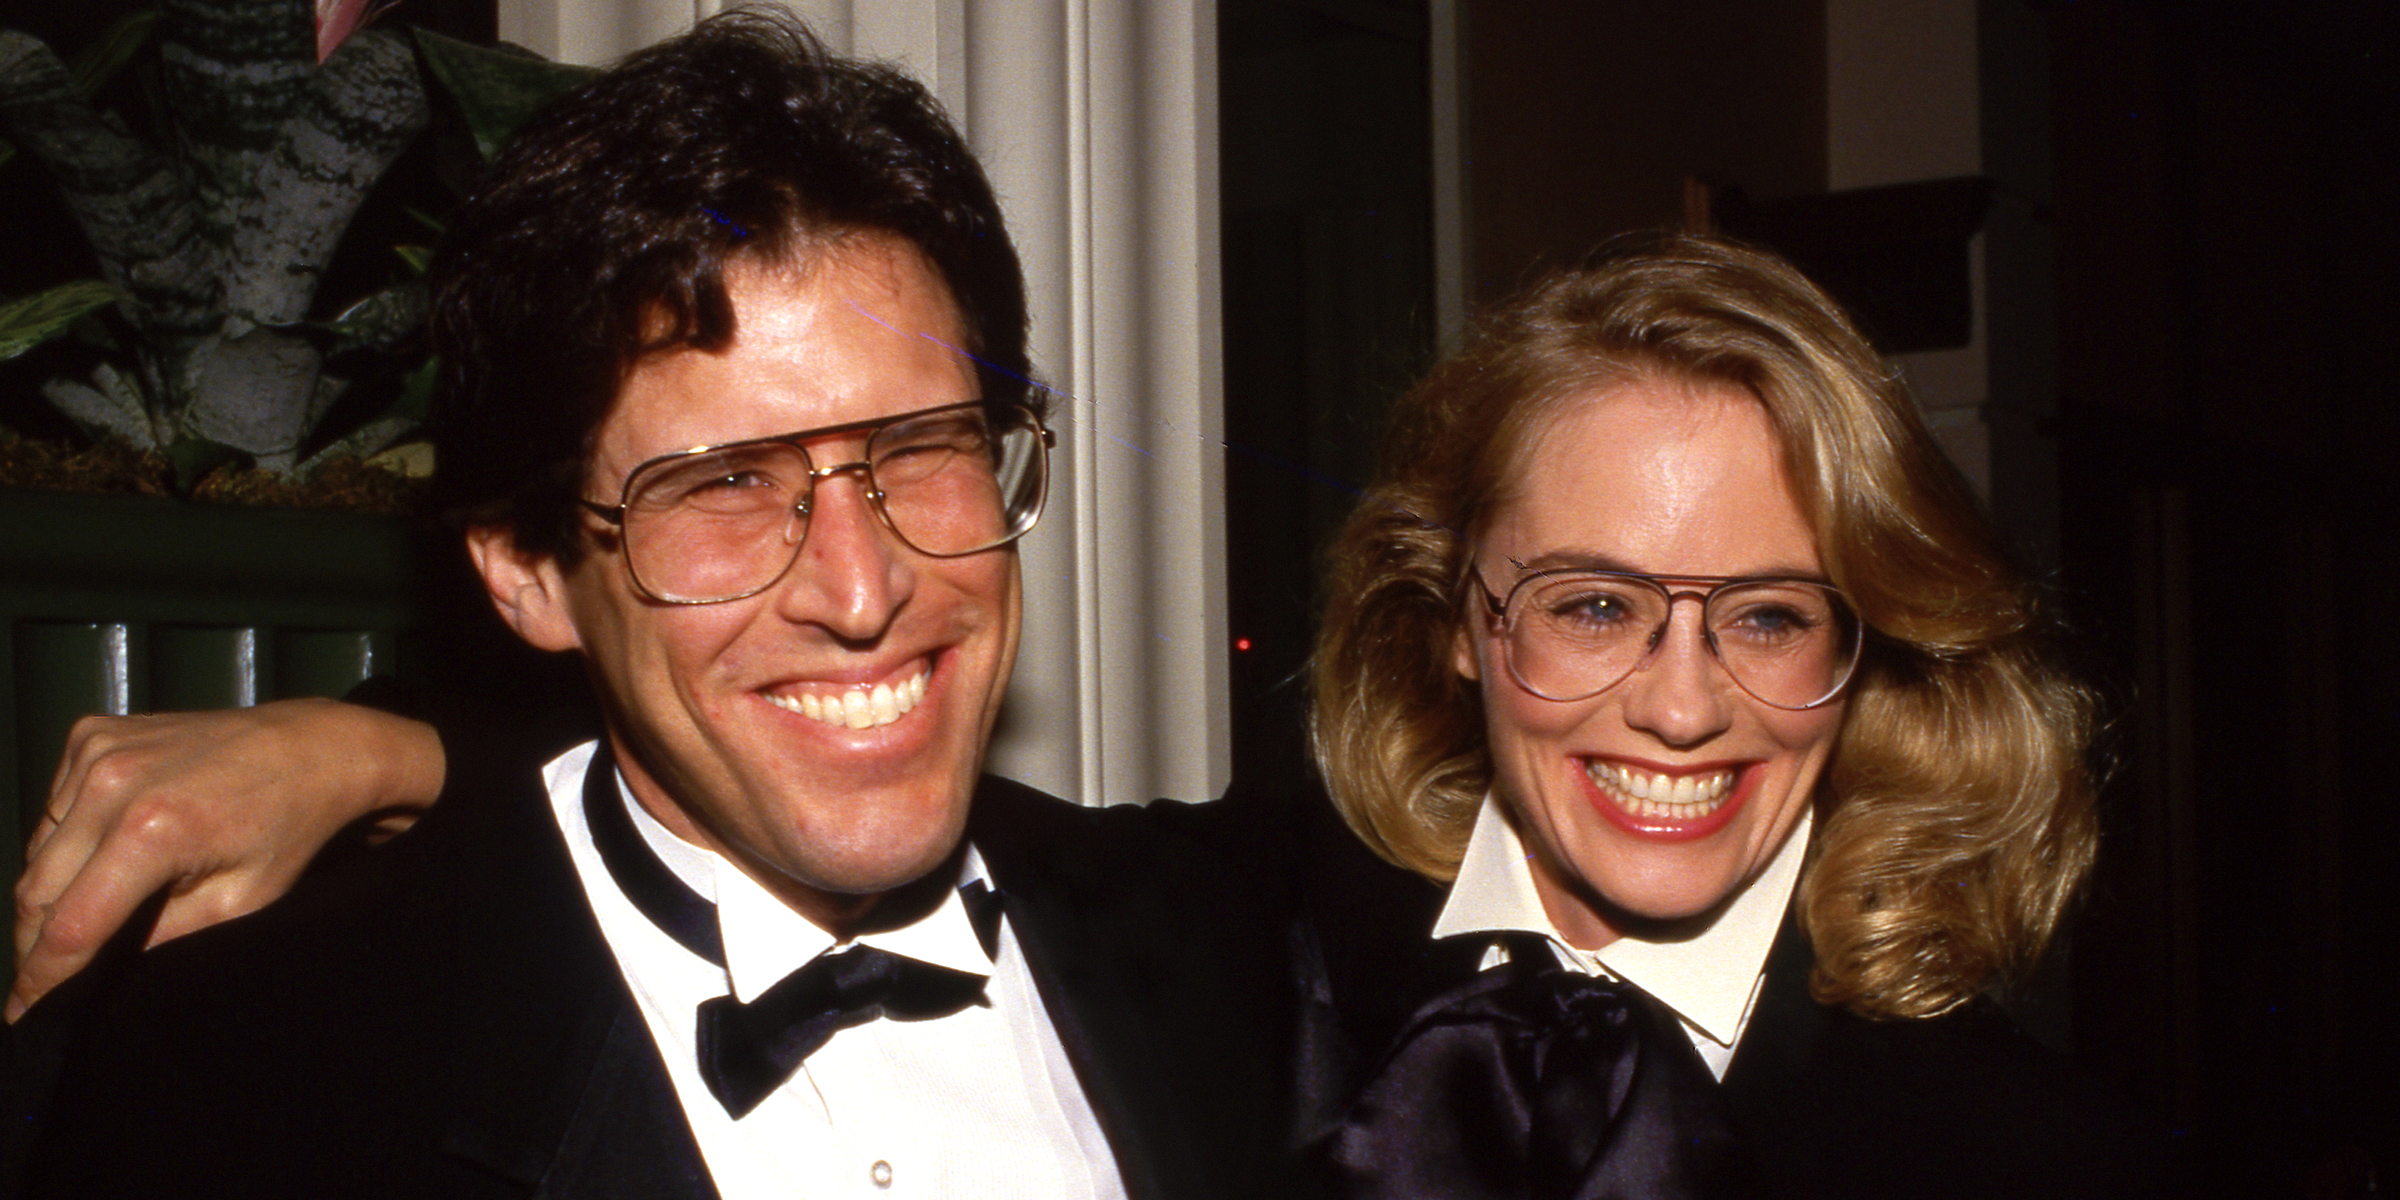 Bruce Oppenheim and Cybill Shepherd | Source: Getty Images